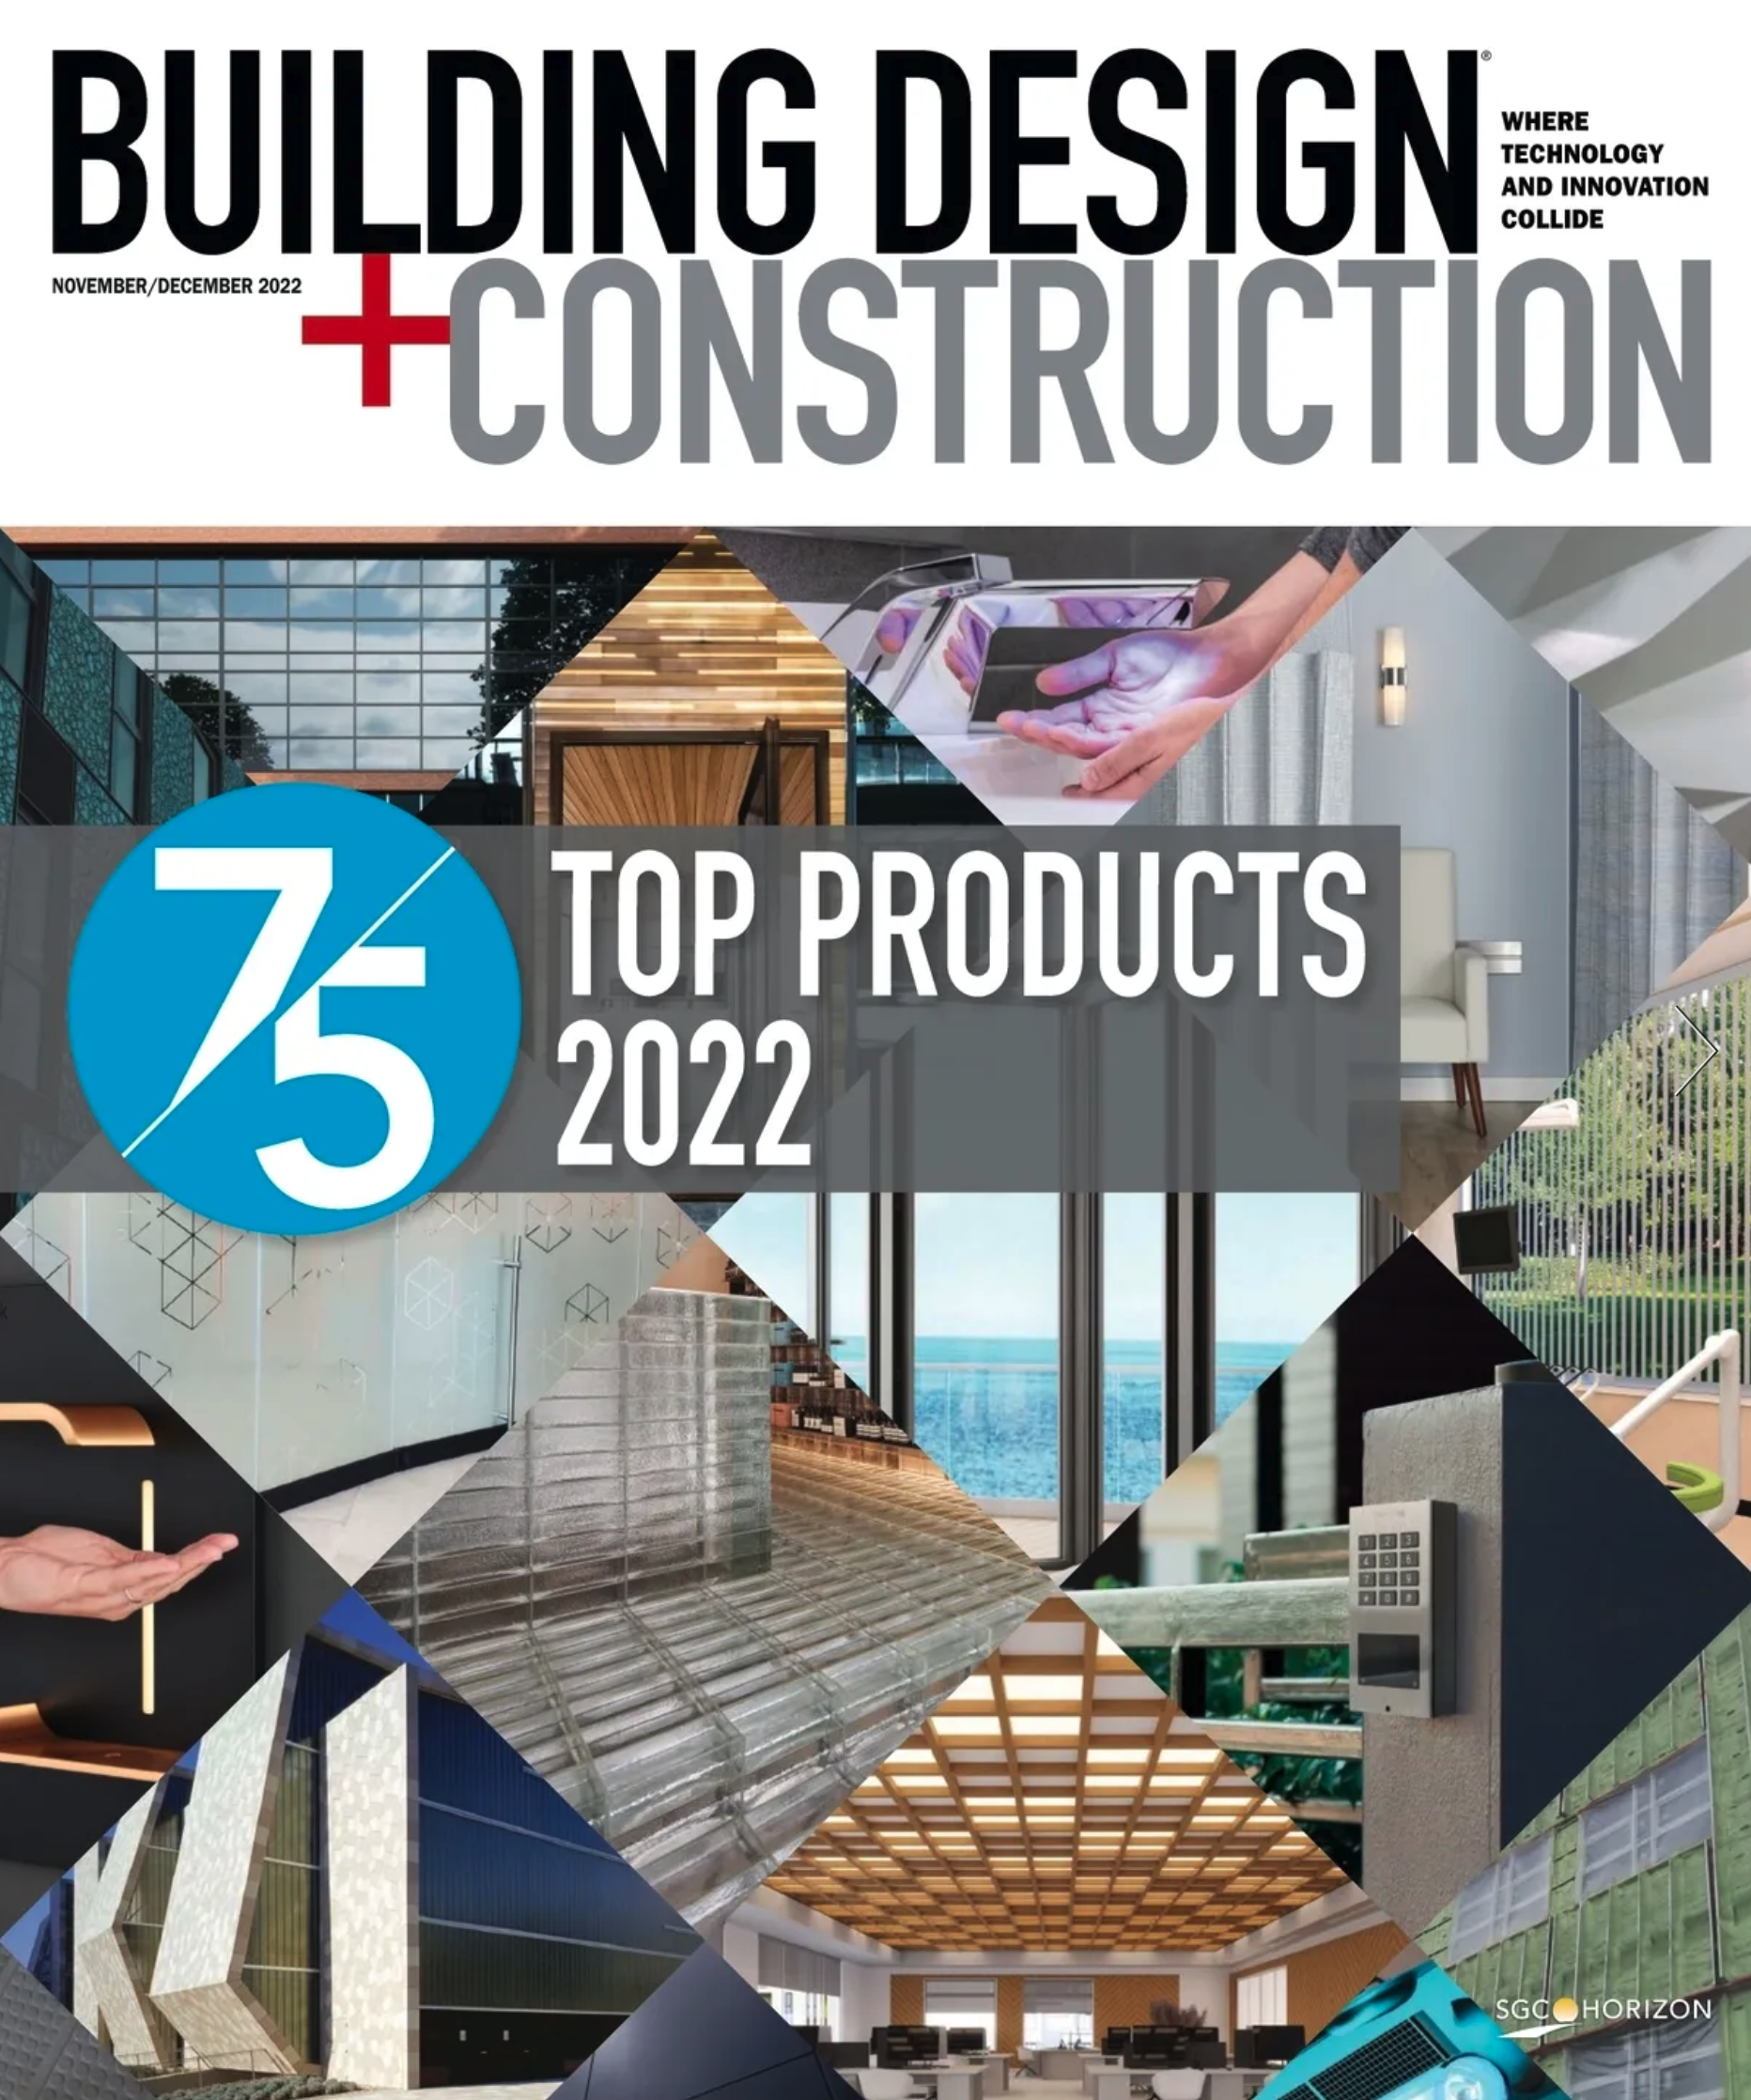 Building Design and Construction Magazine November December 2022 Issue